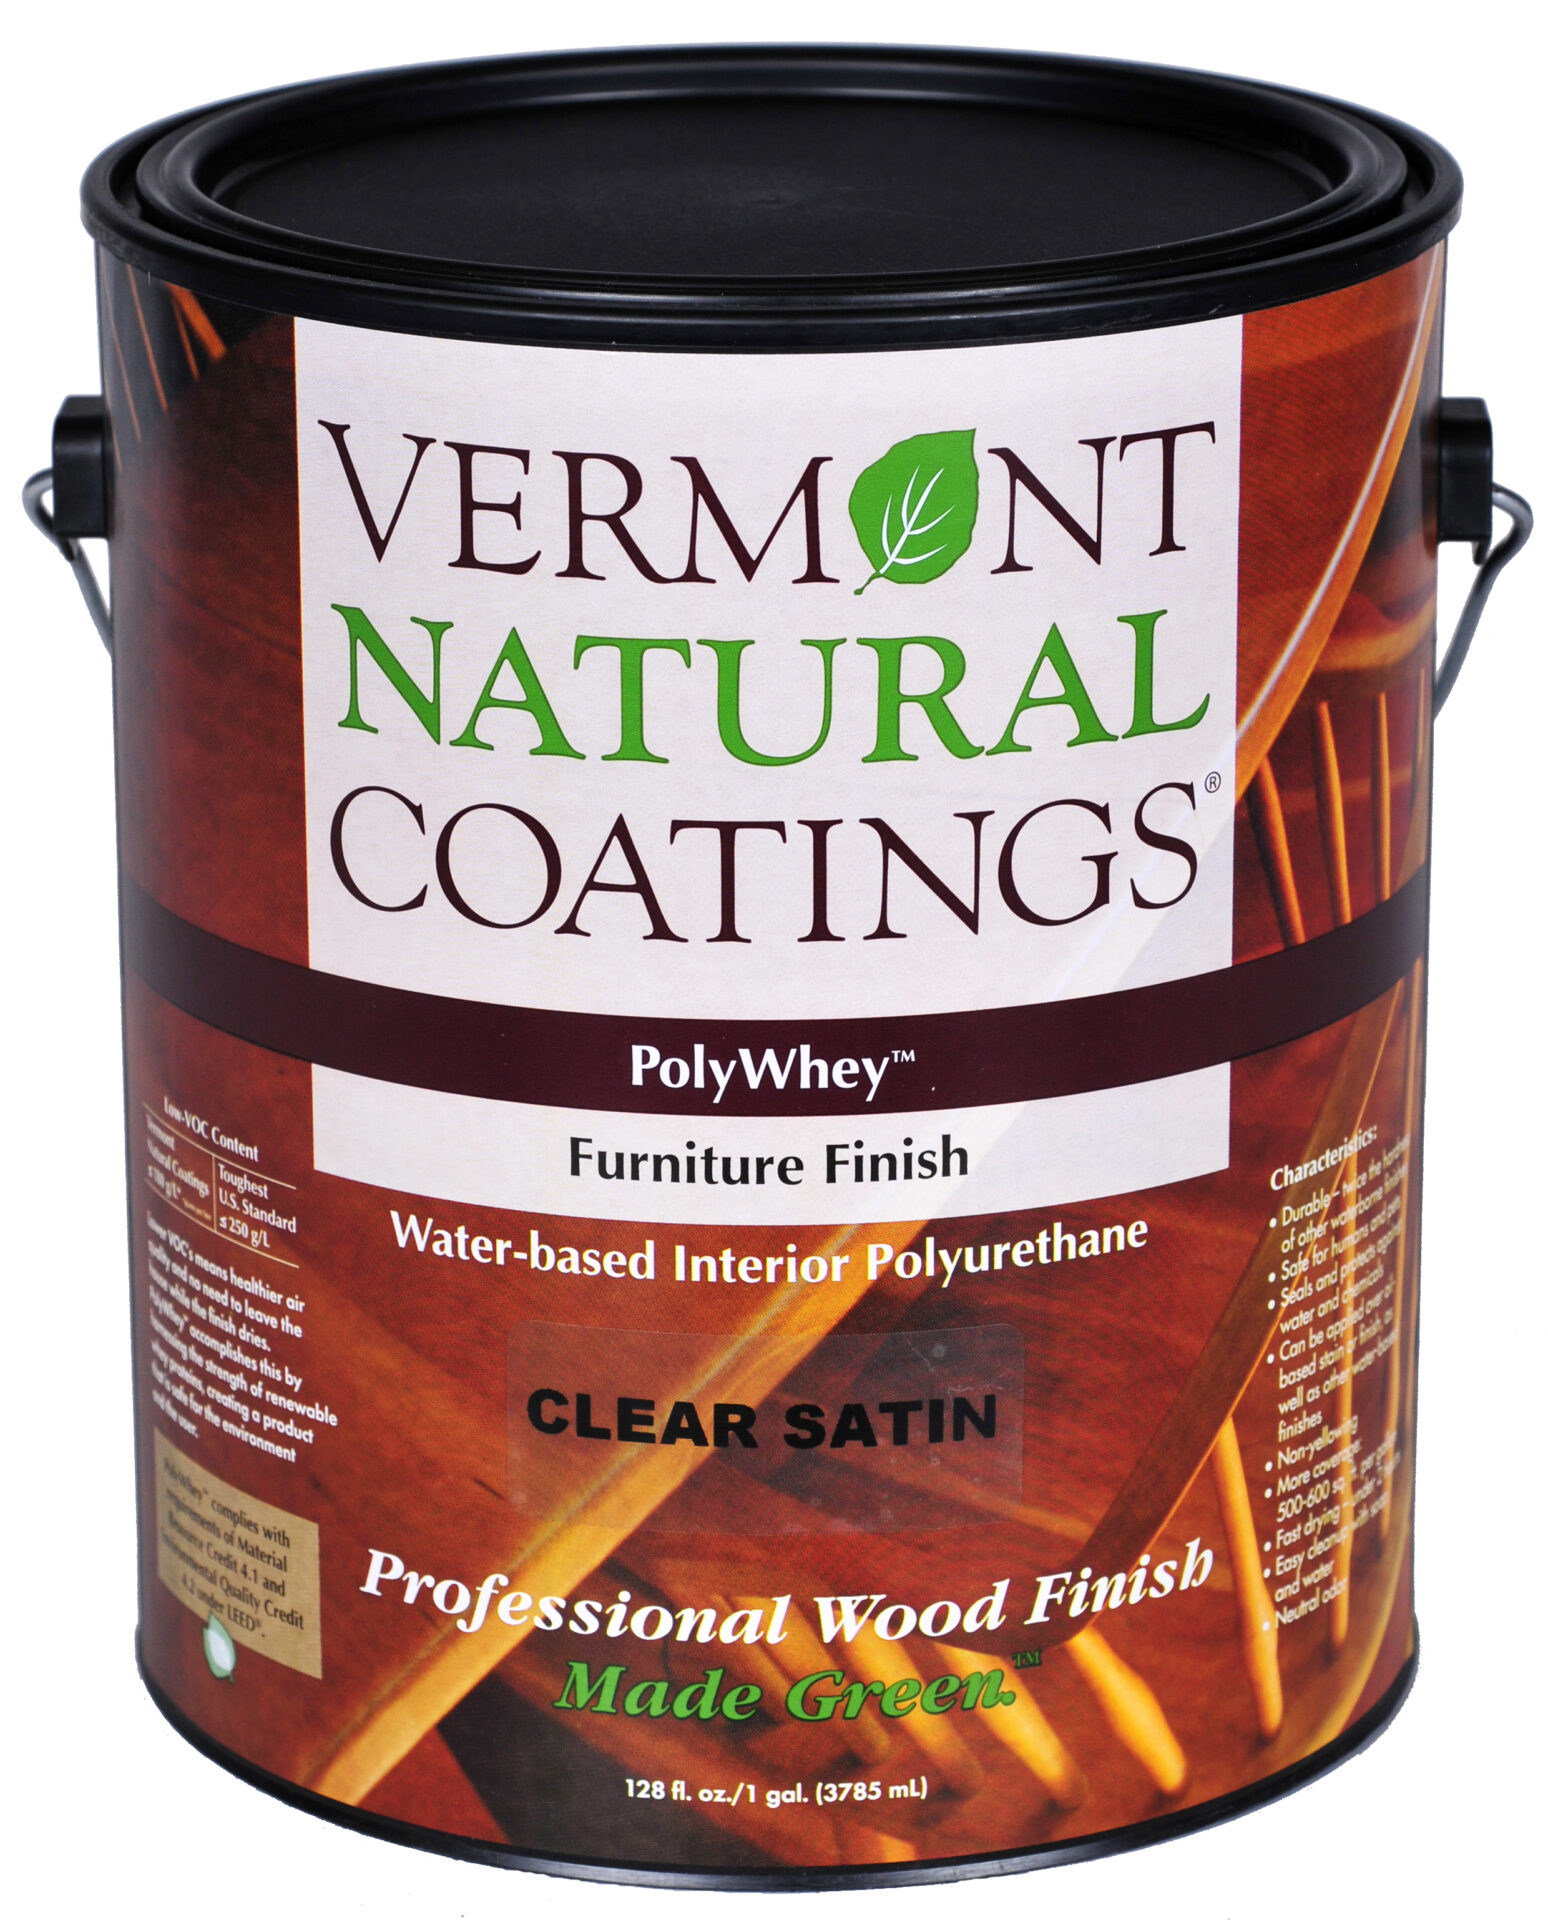 VNC,Vermont-Natural-Coatings,Polywhey,furniture,finish